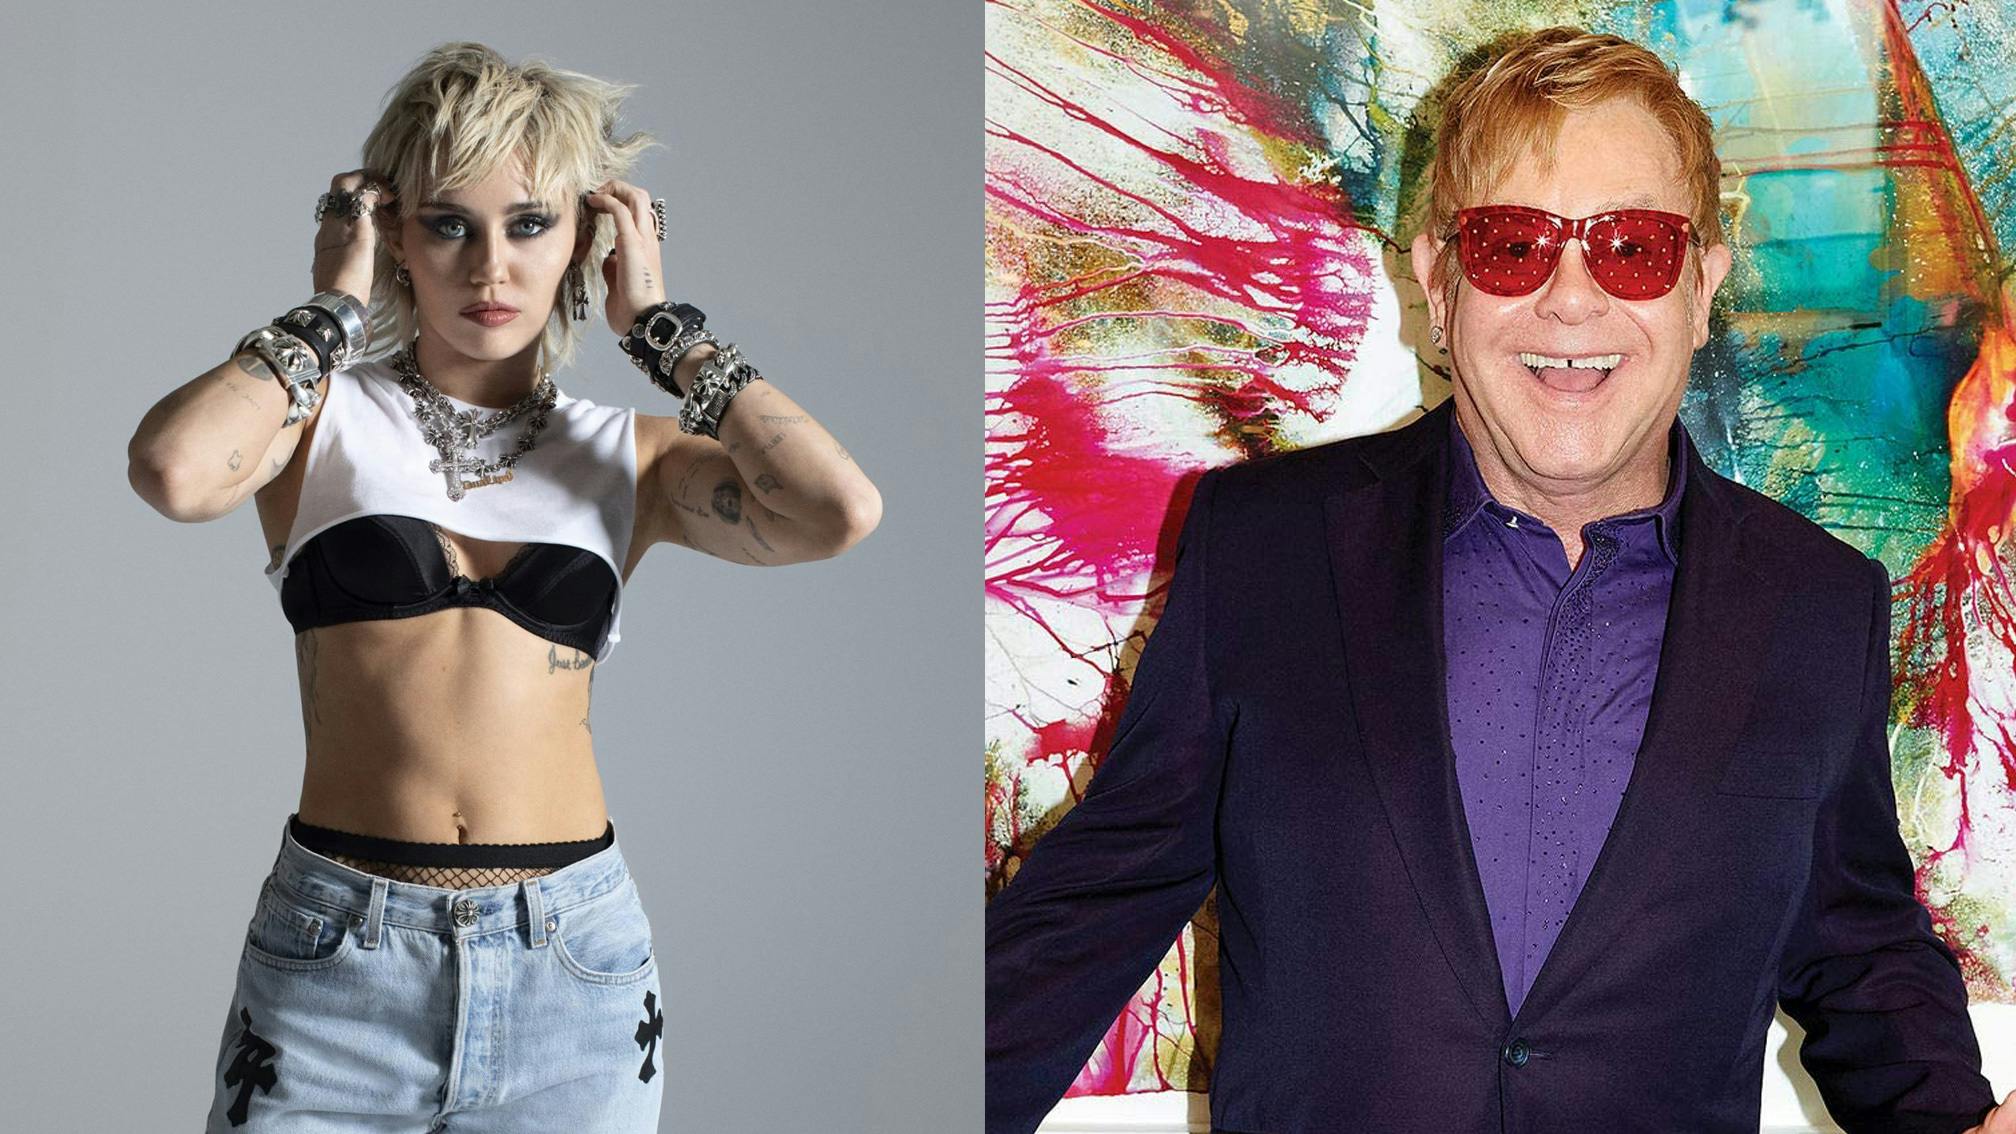 Miley Cyrus has covered Metallica's Nothing Else Matters with Elton John